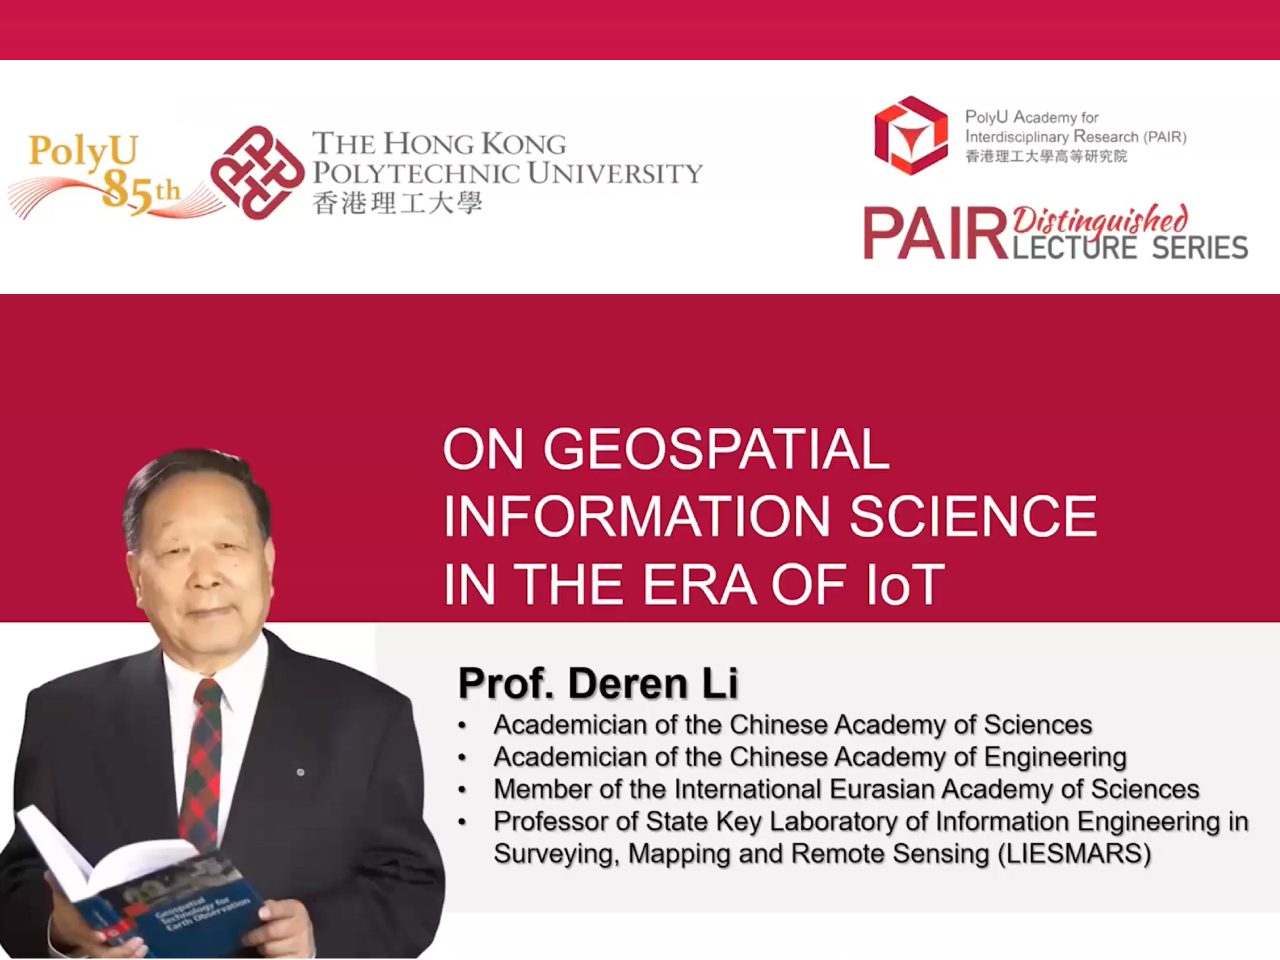 link to PAIR distinguished lecture series 3: On geospatial information science in the era of IoT